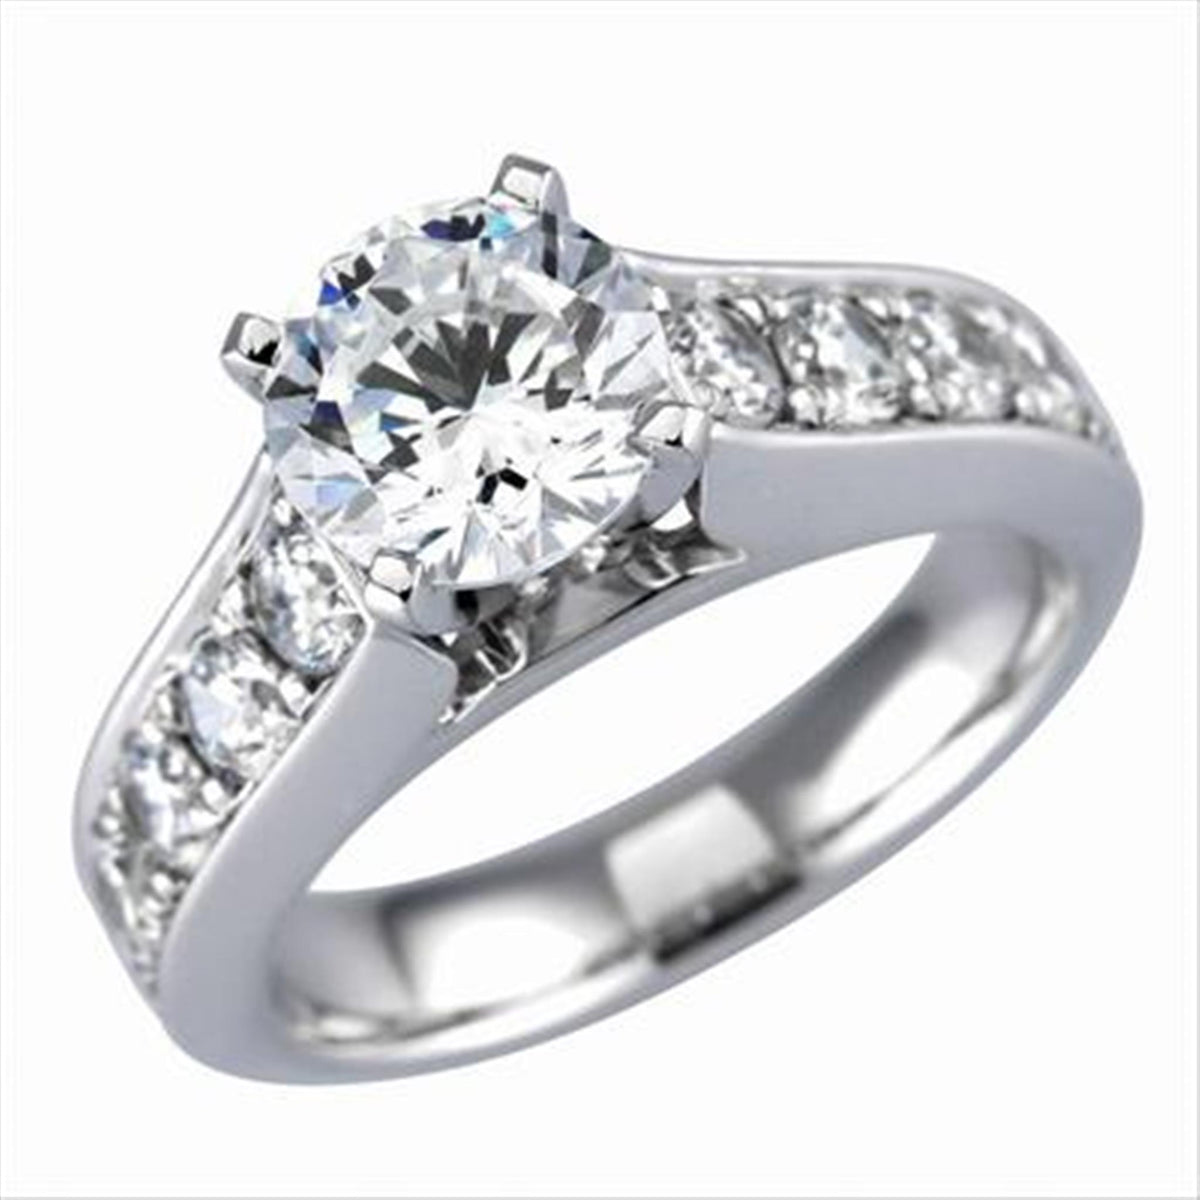 18Kt White Gold Engagement Ring Mounting With 0.82cttw Natural Diamonds